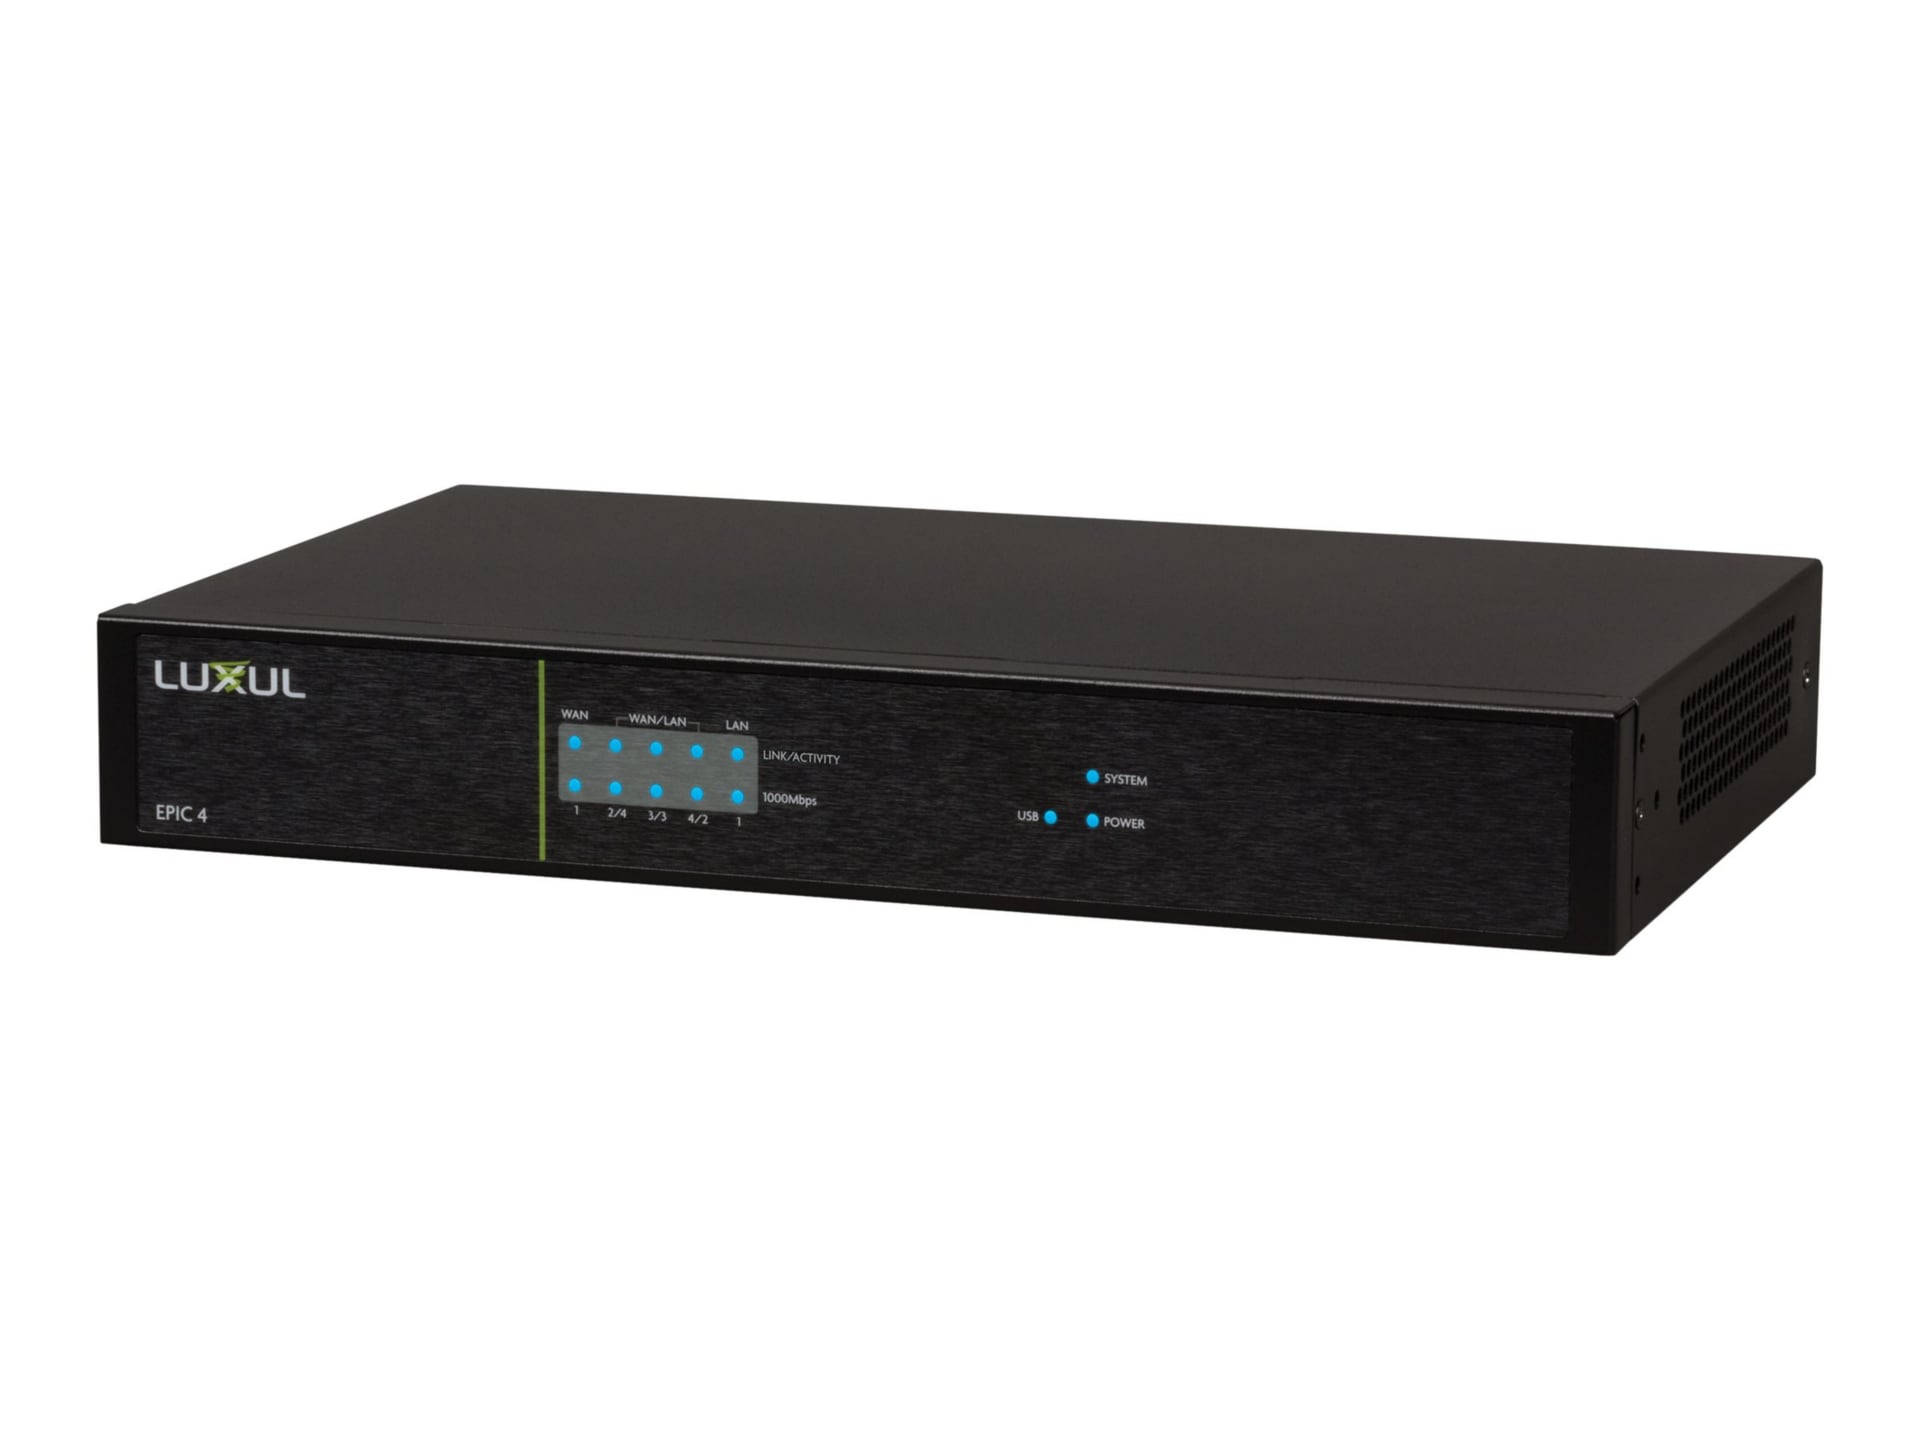 Luxul Epic 4 Multi-WAN Gigabit Router - High-Speed Networking - US Power Co